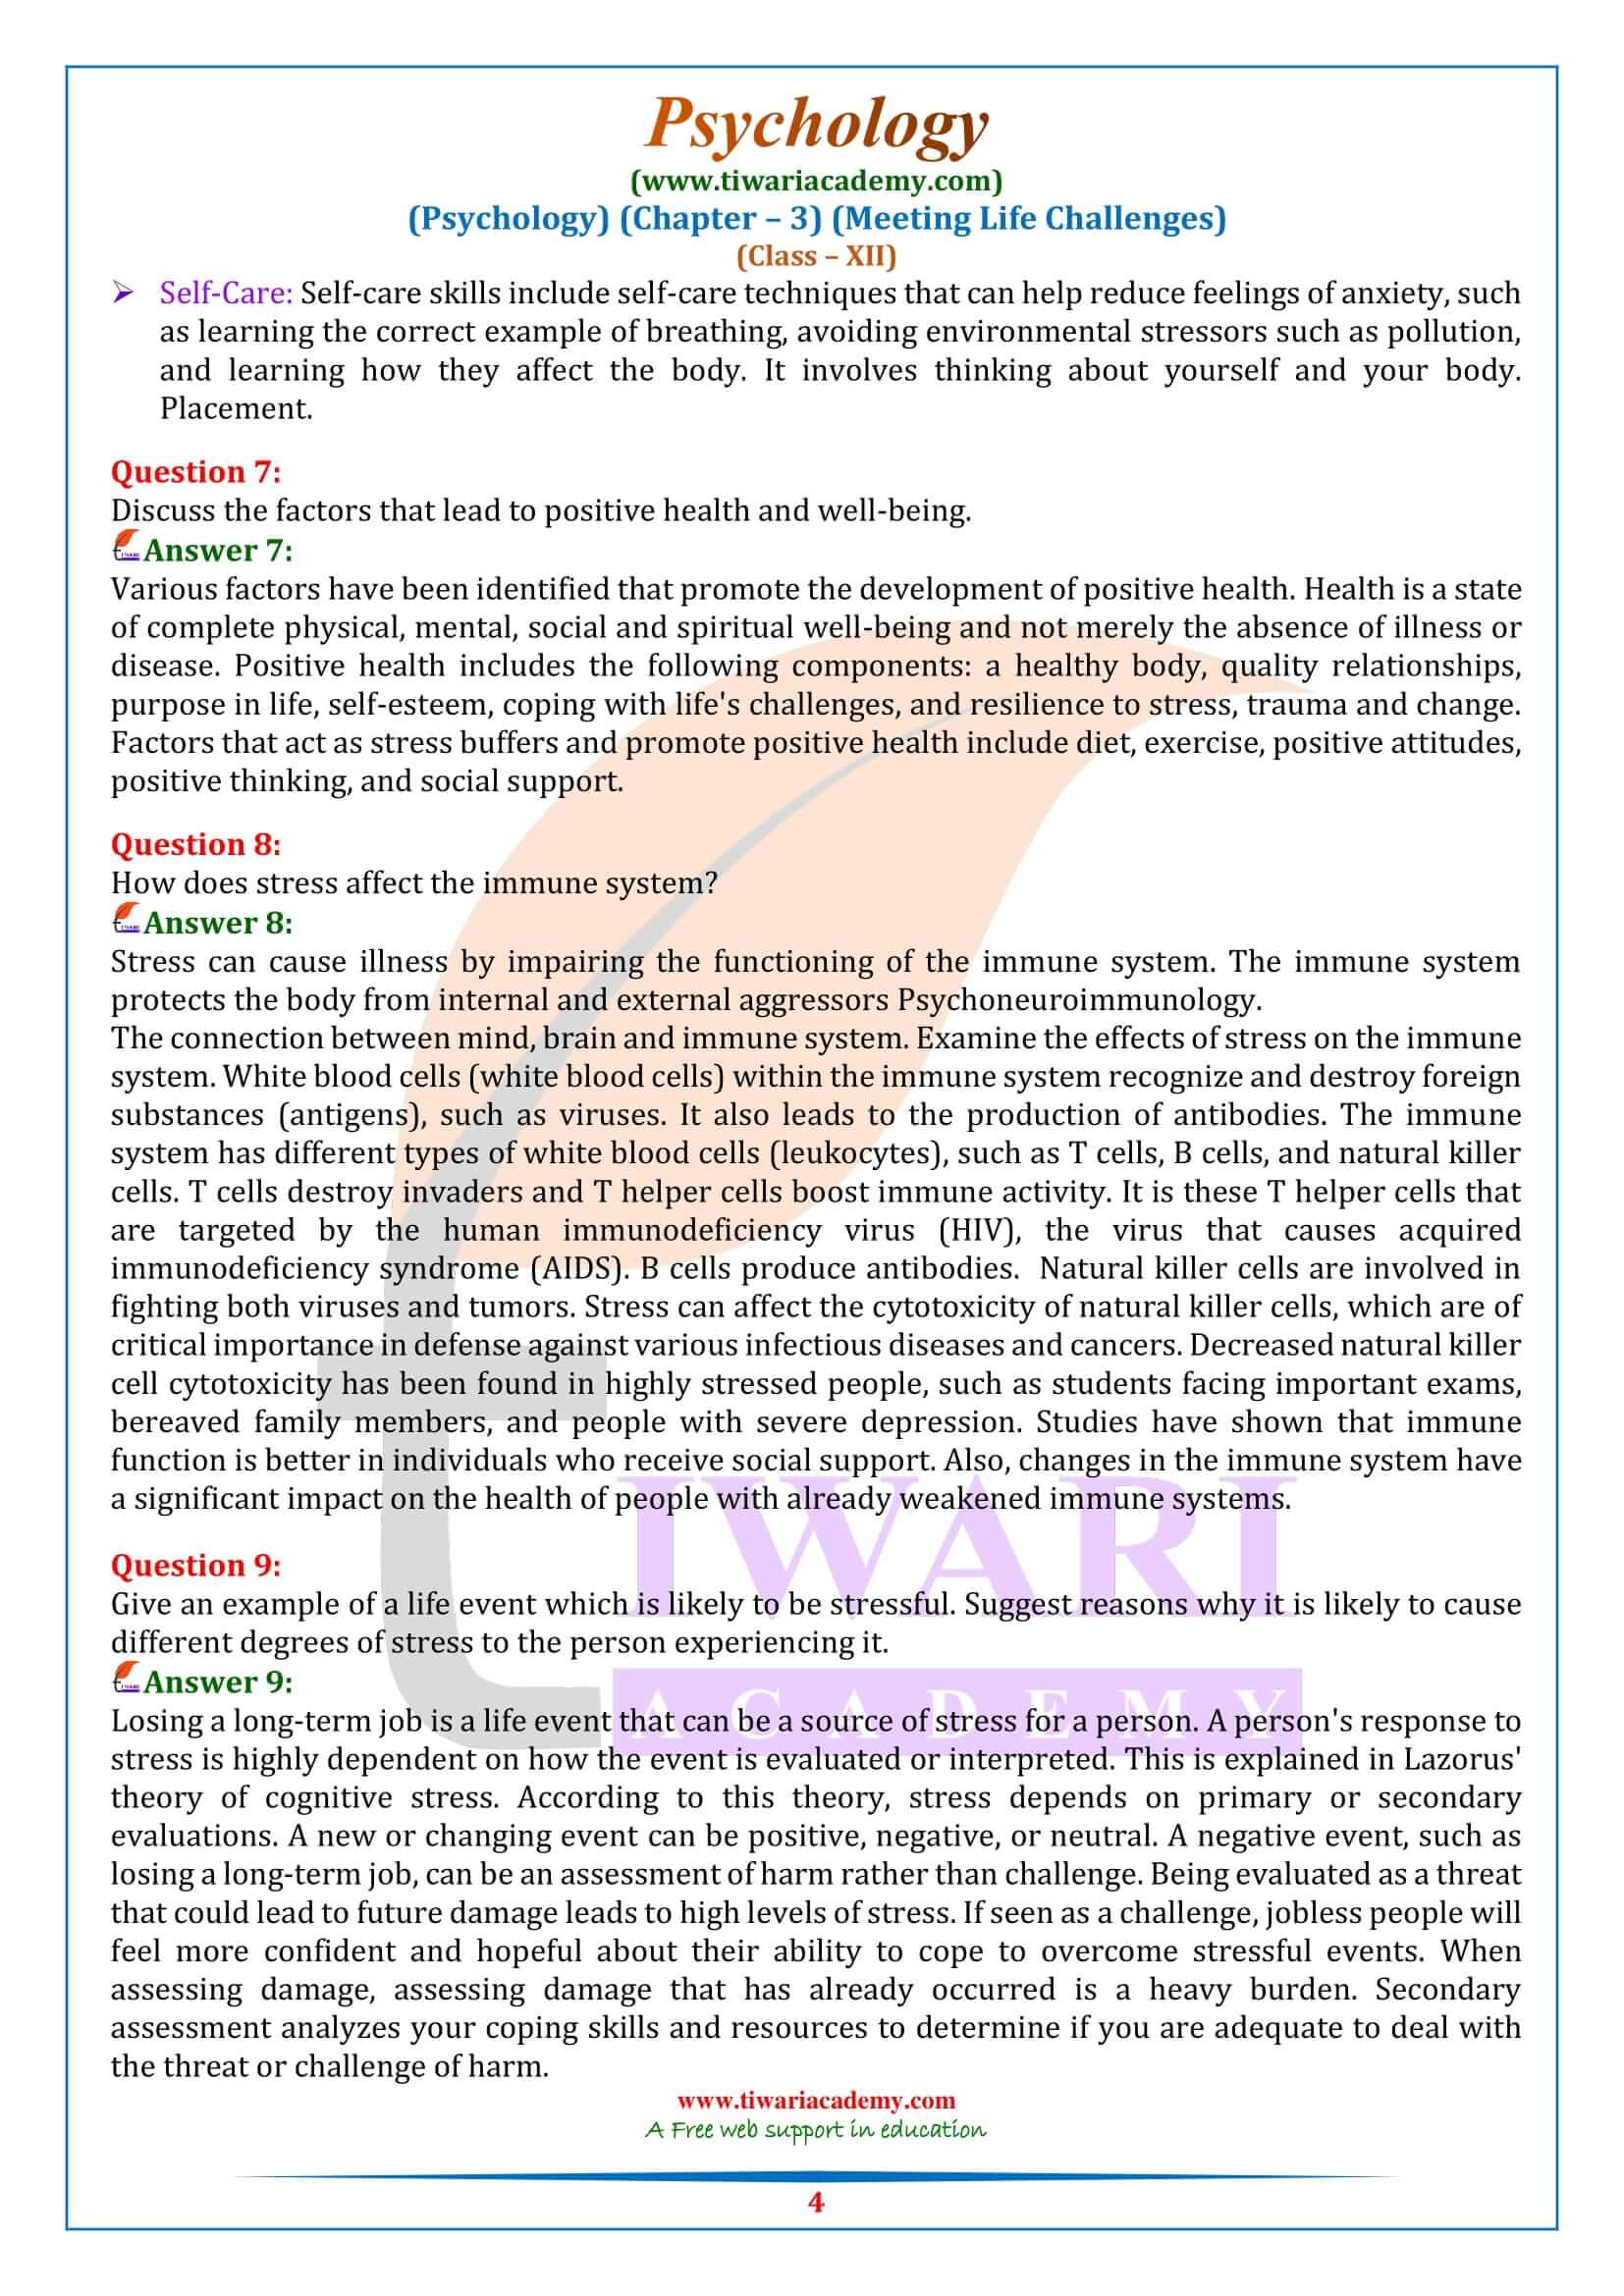 NCERT Solutions for Class 12 Psychology Chapter 3 exercises